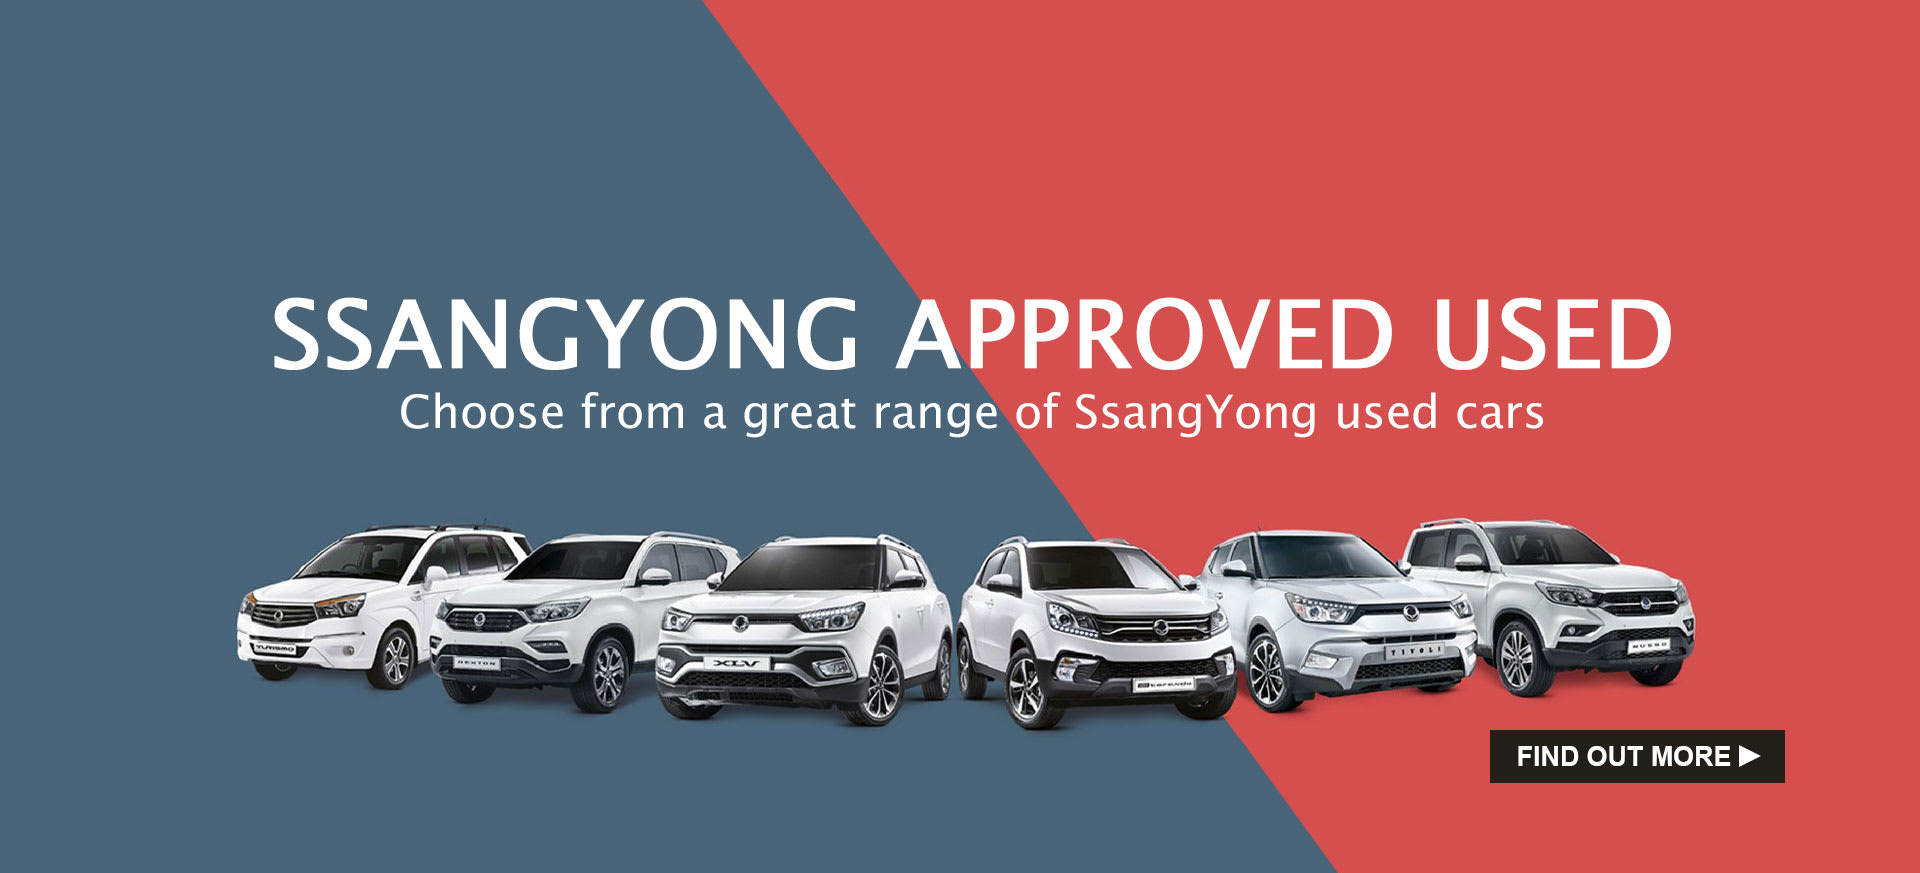 Ssangyong used cars